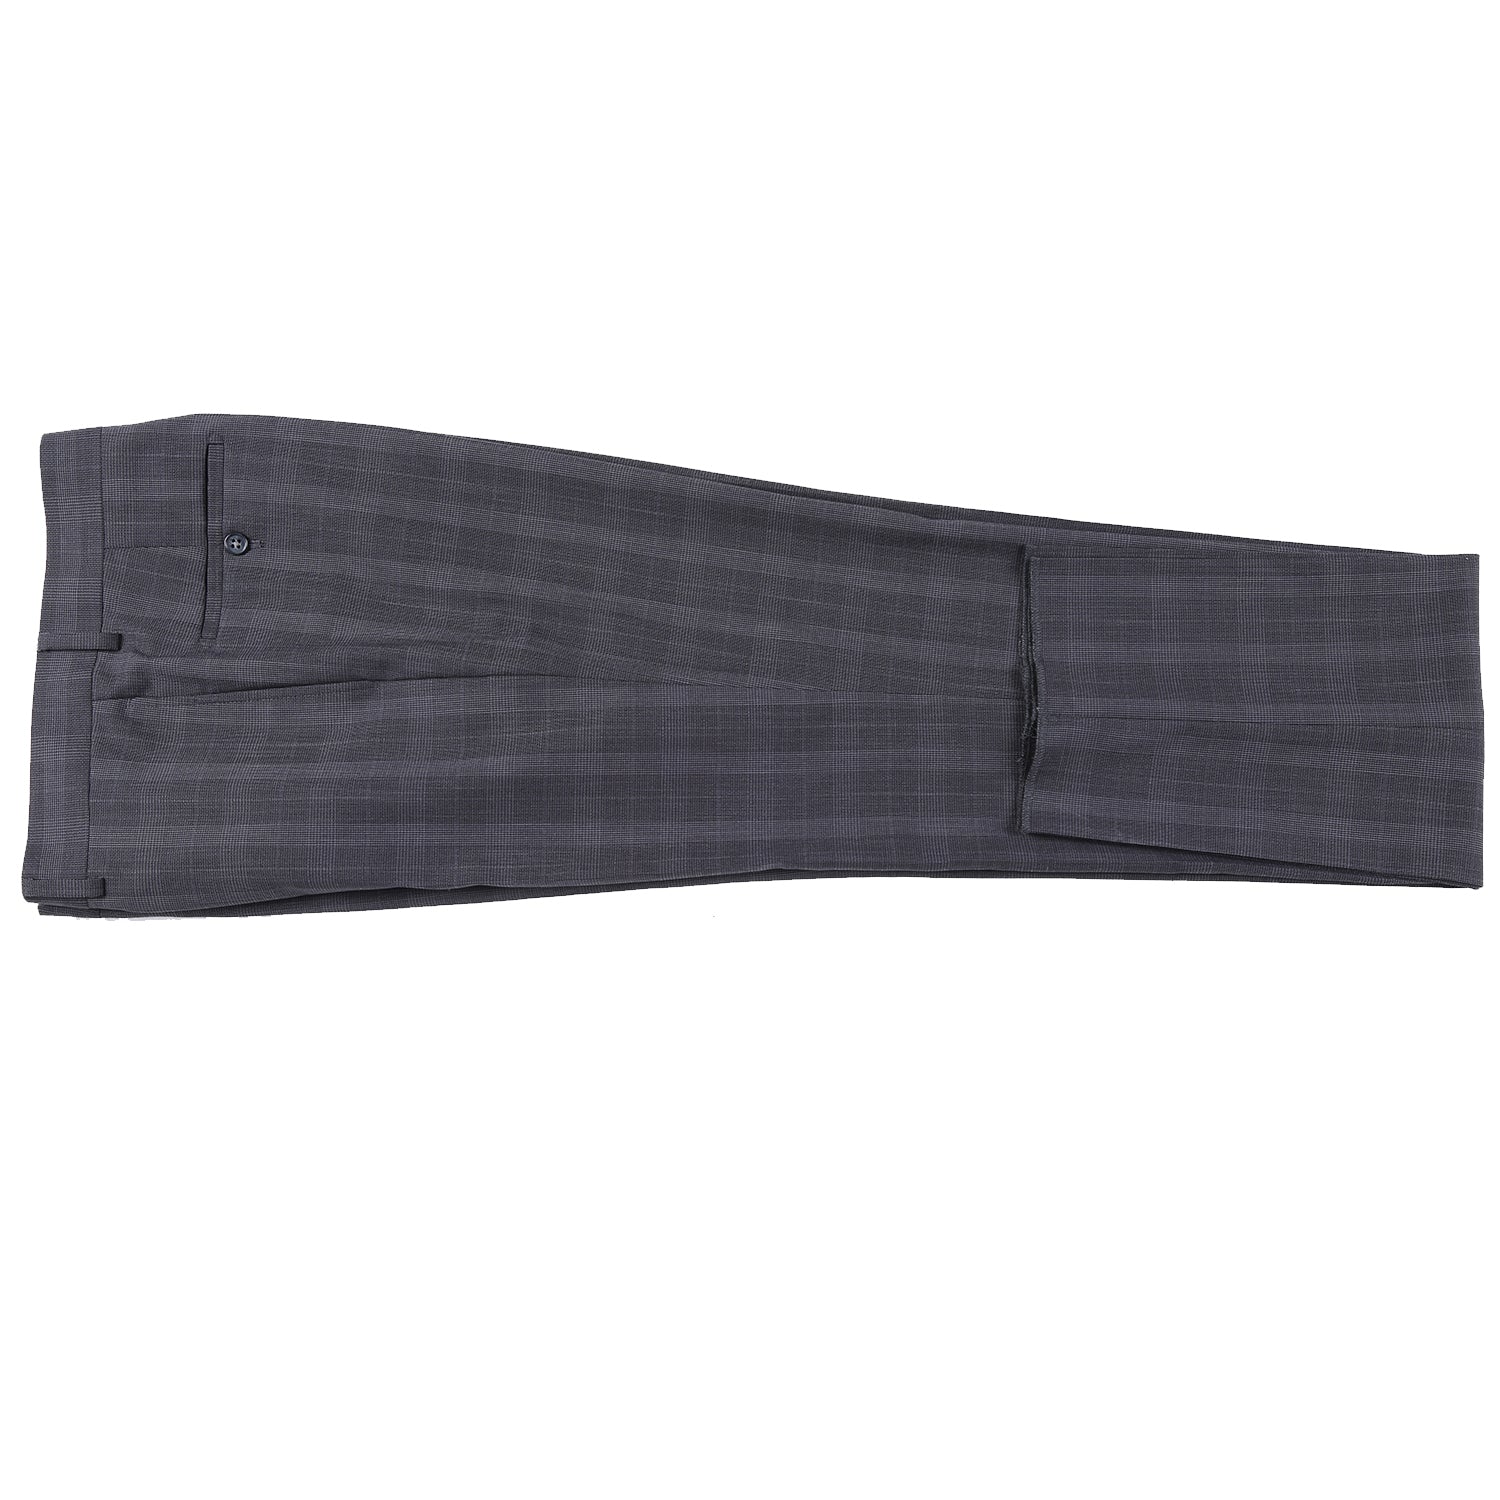 Stretch Performance Single Breasted SLIM FIT Suit in Charcoal Plaid (Short, Regular, and Long Available) by English Laundry